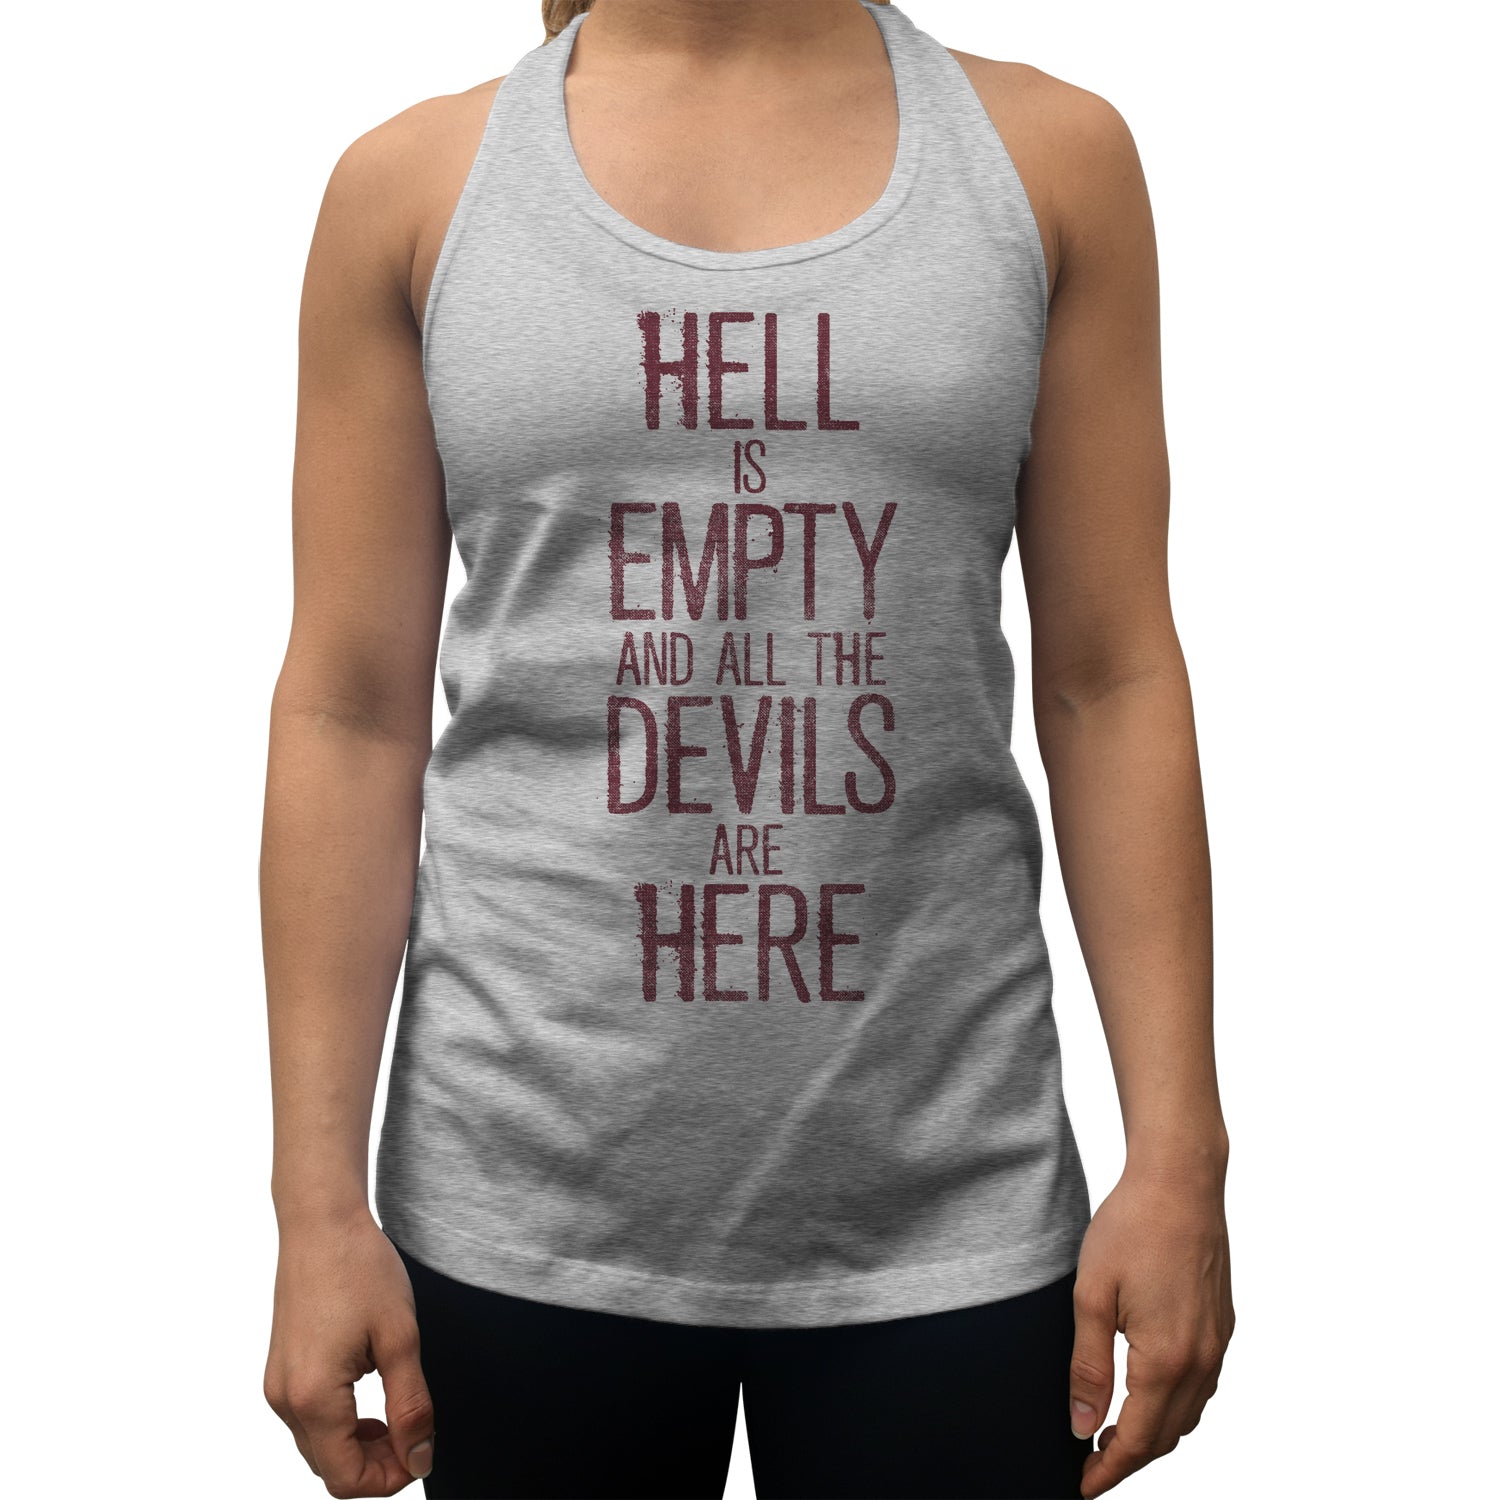 Women's Hell is Empty and All the Devils are Here Shakespeare Racerback Tank Top